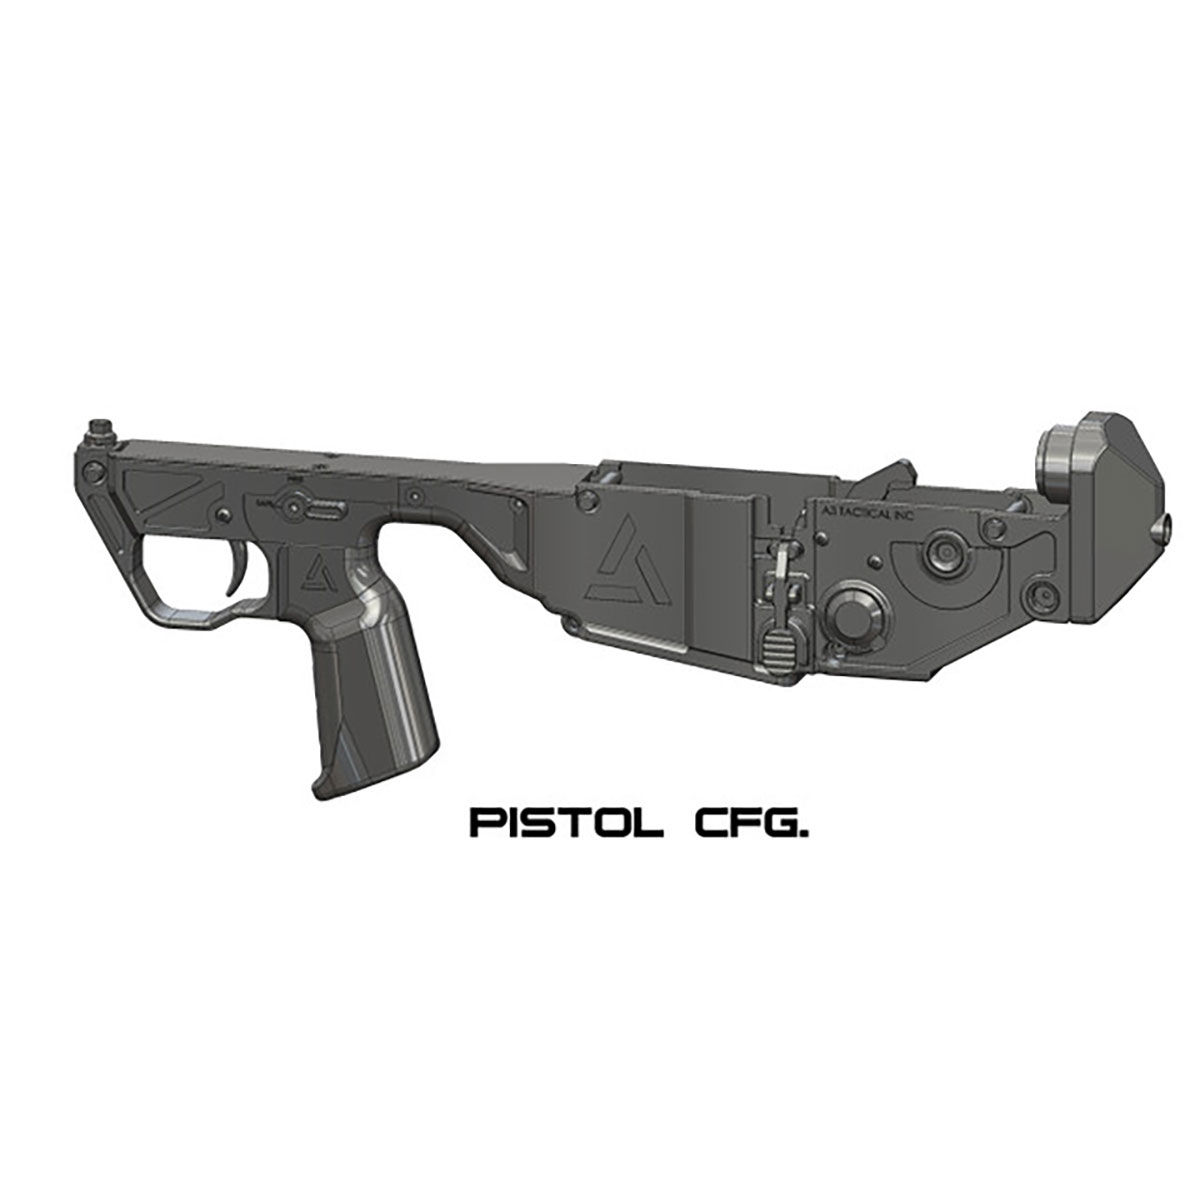 A3 TACTICAL - TRIAD BULLPUP CHASSIS for FOXTROT MIKES UPPER RECEIVER PISTOL